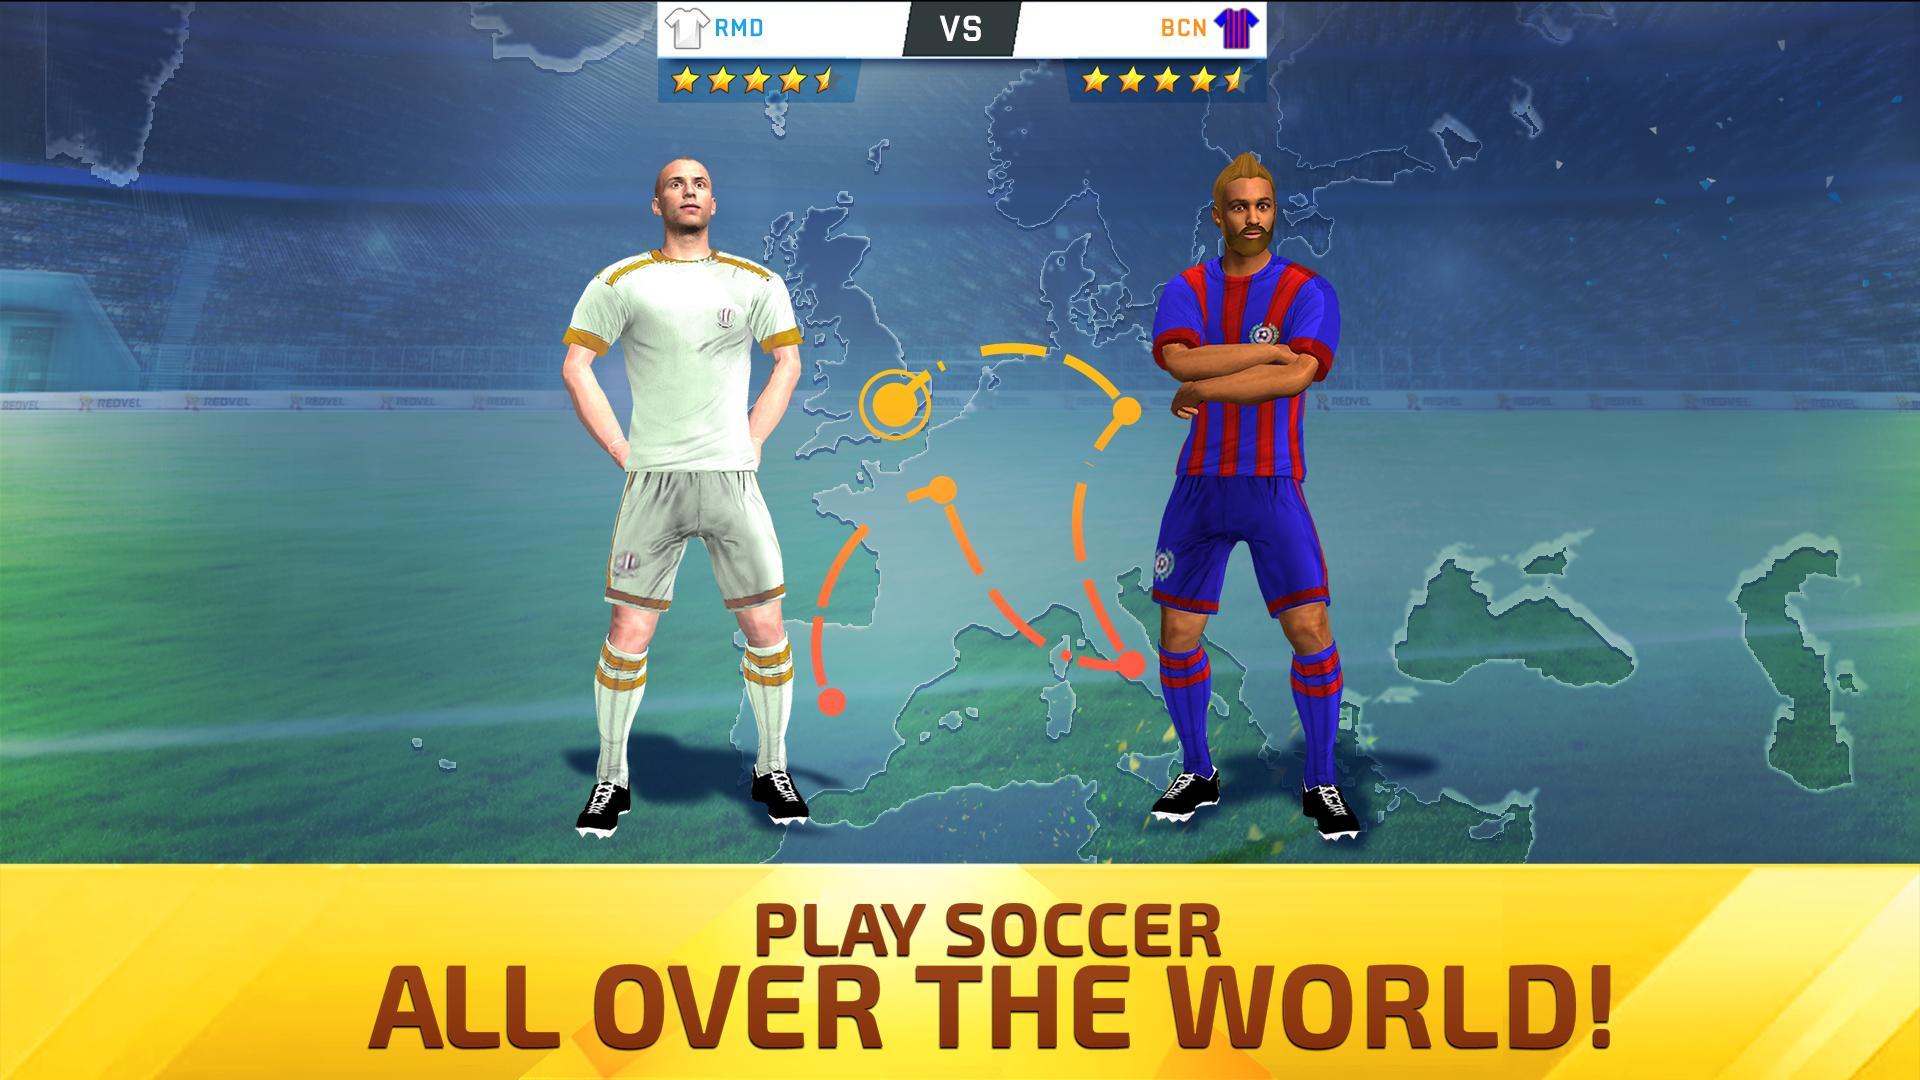 Soccer Star 2020 Top Leagues: Play the SOCCER game 2.4.0 Screenshot 13